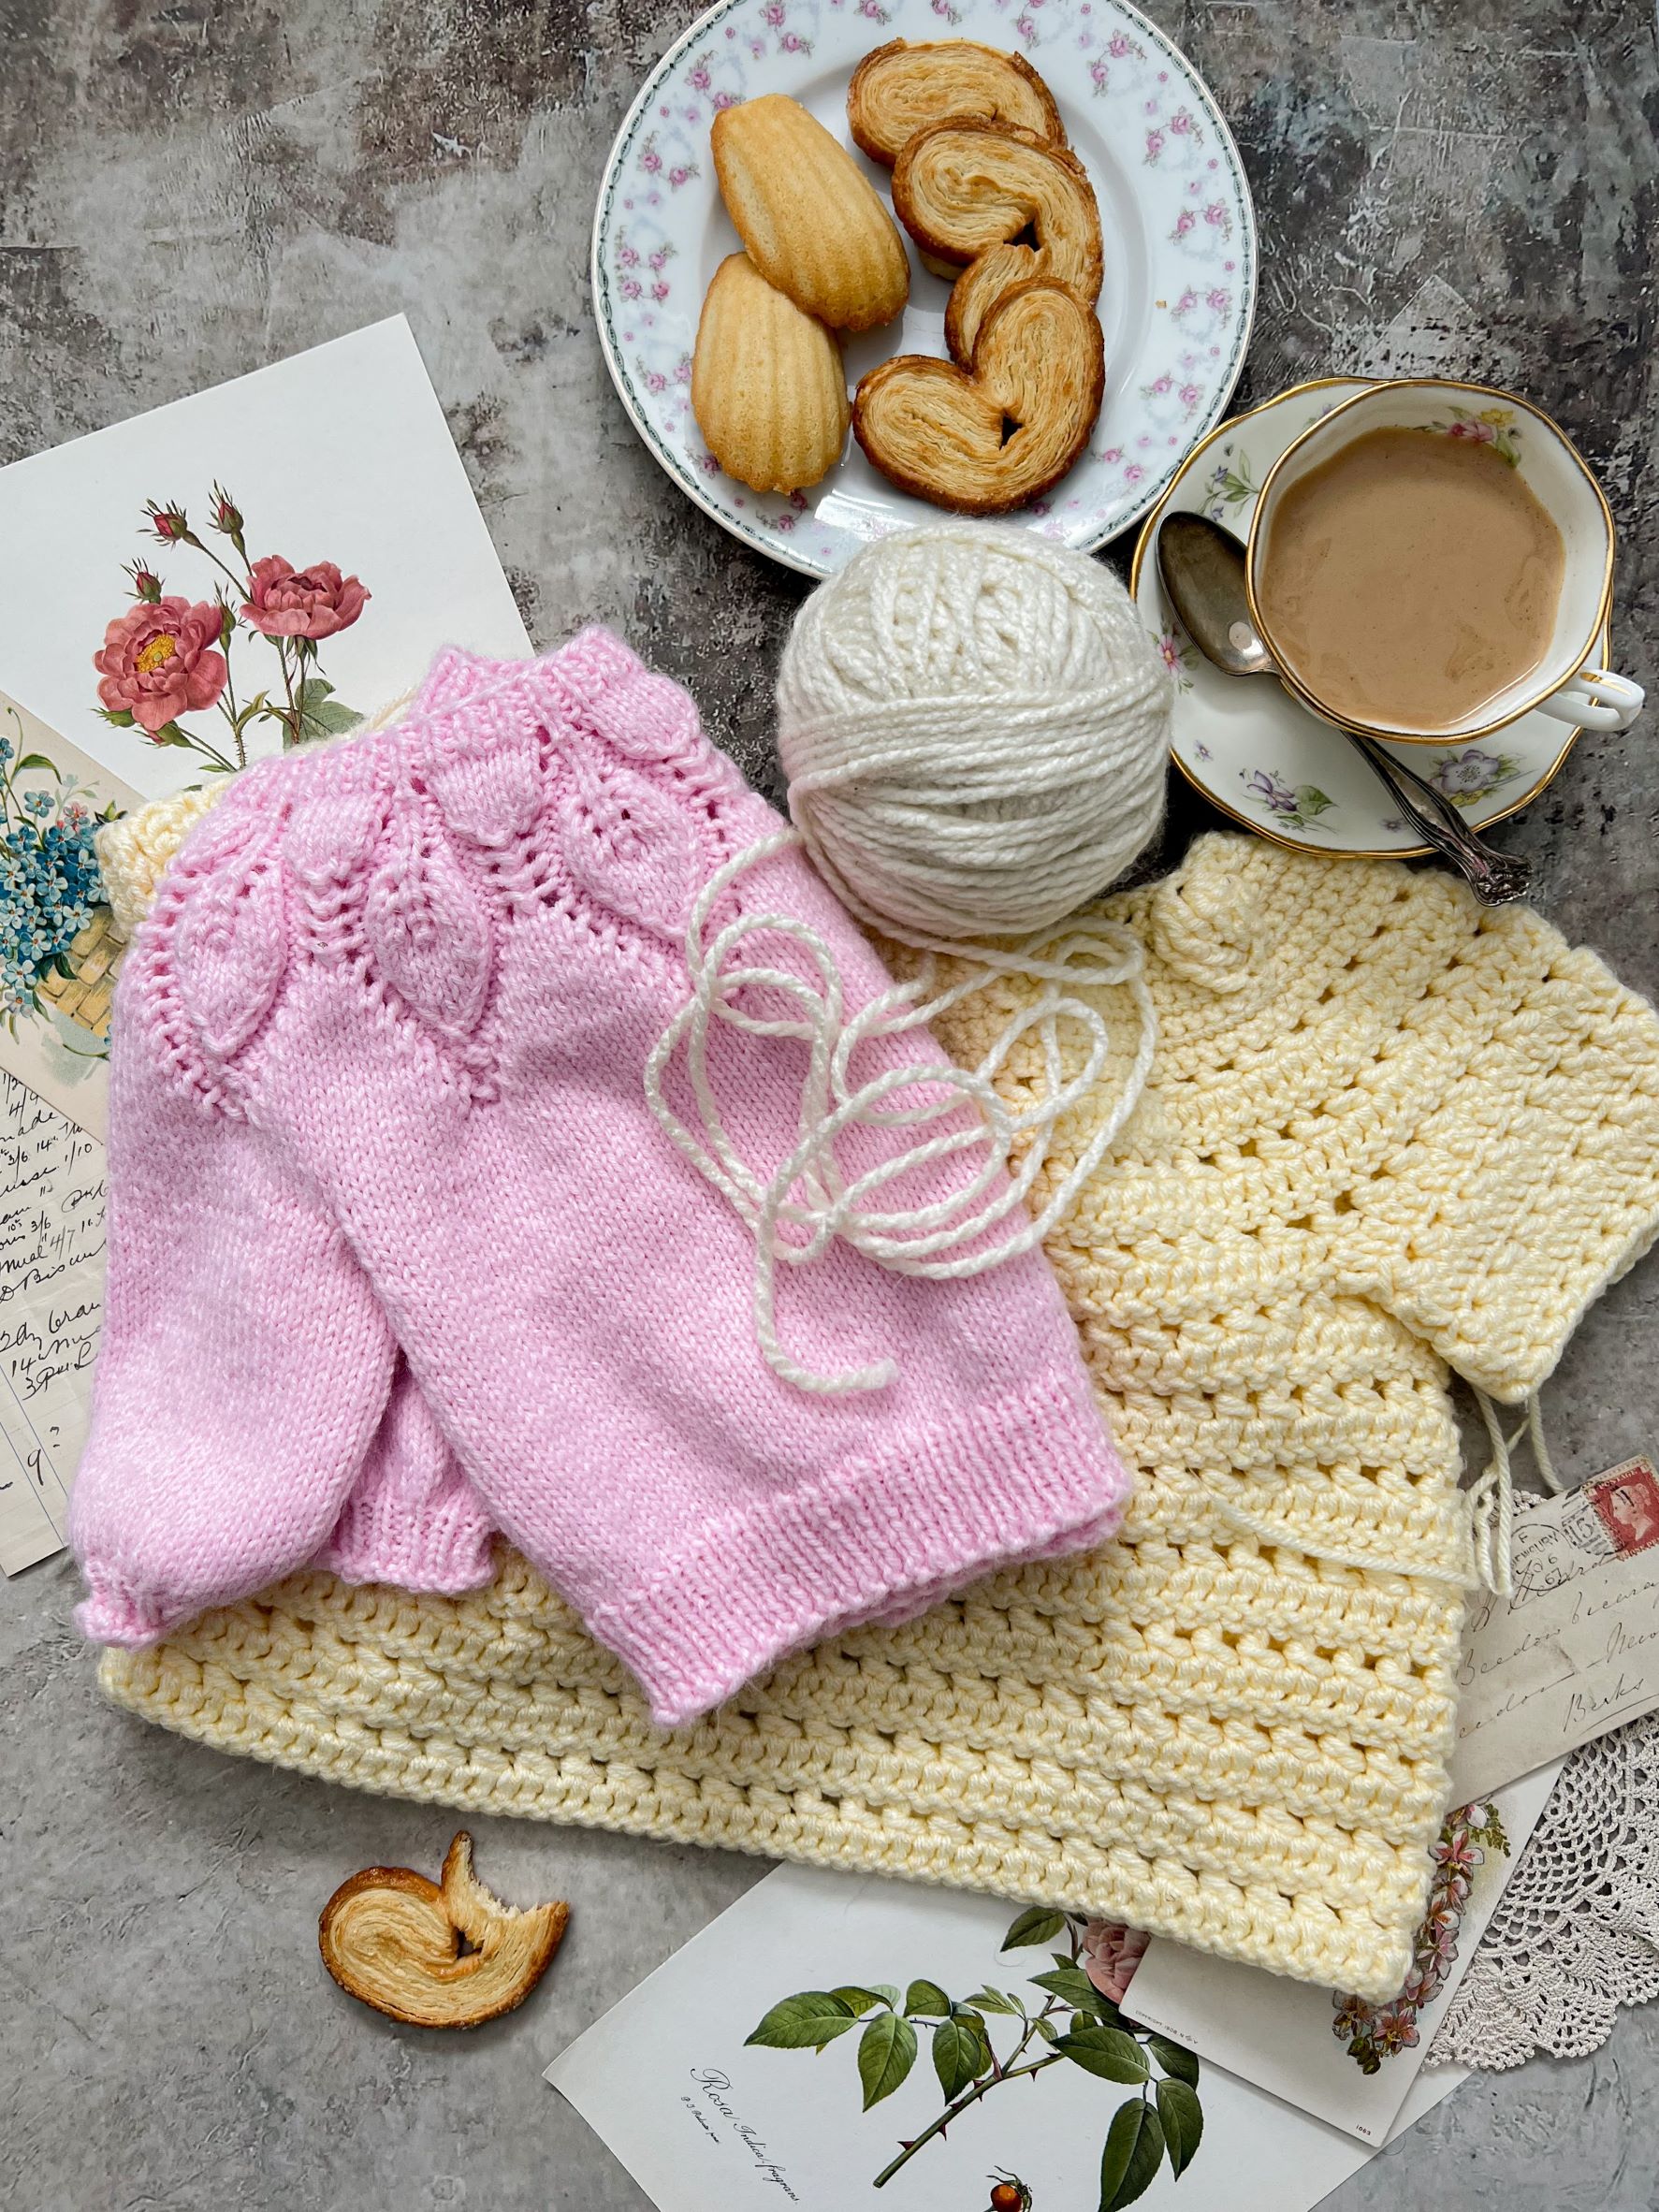 How to price hand-knit items [10 important things to consider]